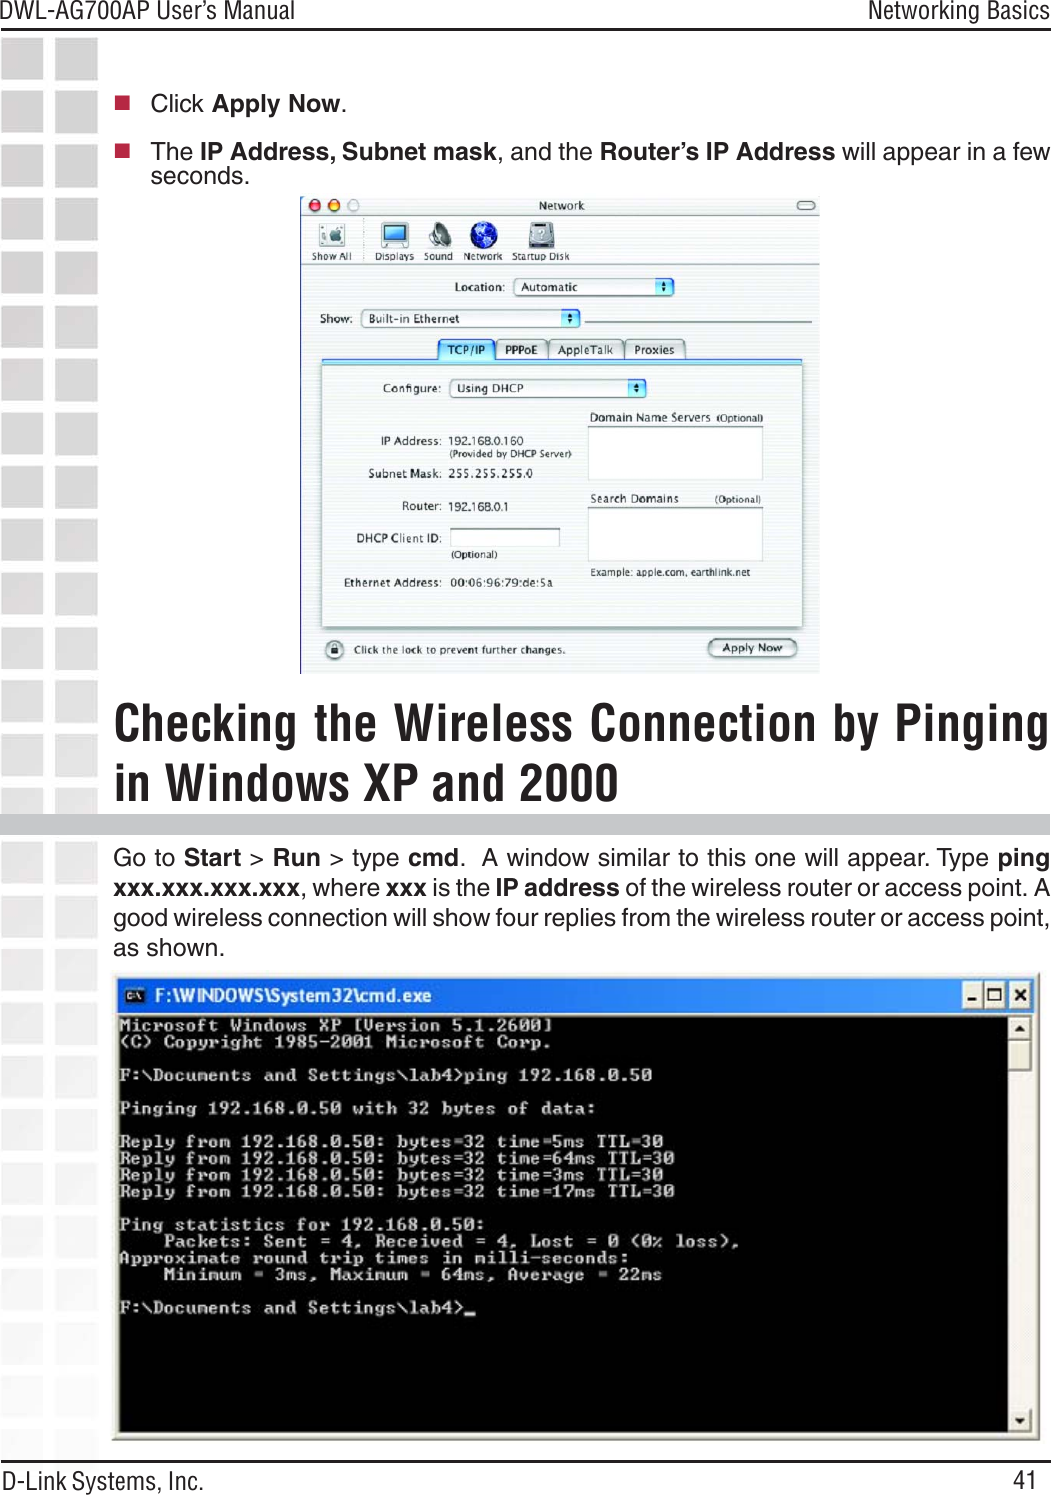 41DWL-AG700AP User’s ManualD-Link Systems, Inc.Networking BasicsClick Apply Now.The IP Address, Subnet mask, and the Router’s IP Address will appear in a fewseconds.Go to Start &gt; Run &gt; type cmd.  A window similar to this one will appear. Type pingxxx.xxx.xxx.xxx, where xxx is the IP address of the wireless router or access point. Agood wireless connection will show four replies from the wireless router or access point,as shown.Checking the Wireless Connection by Pingingin Windows XP and 2000